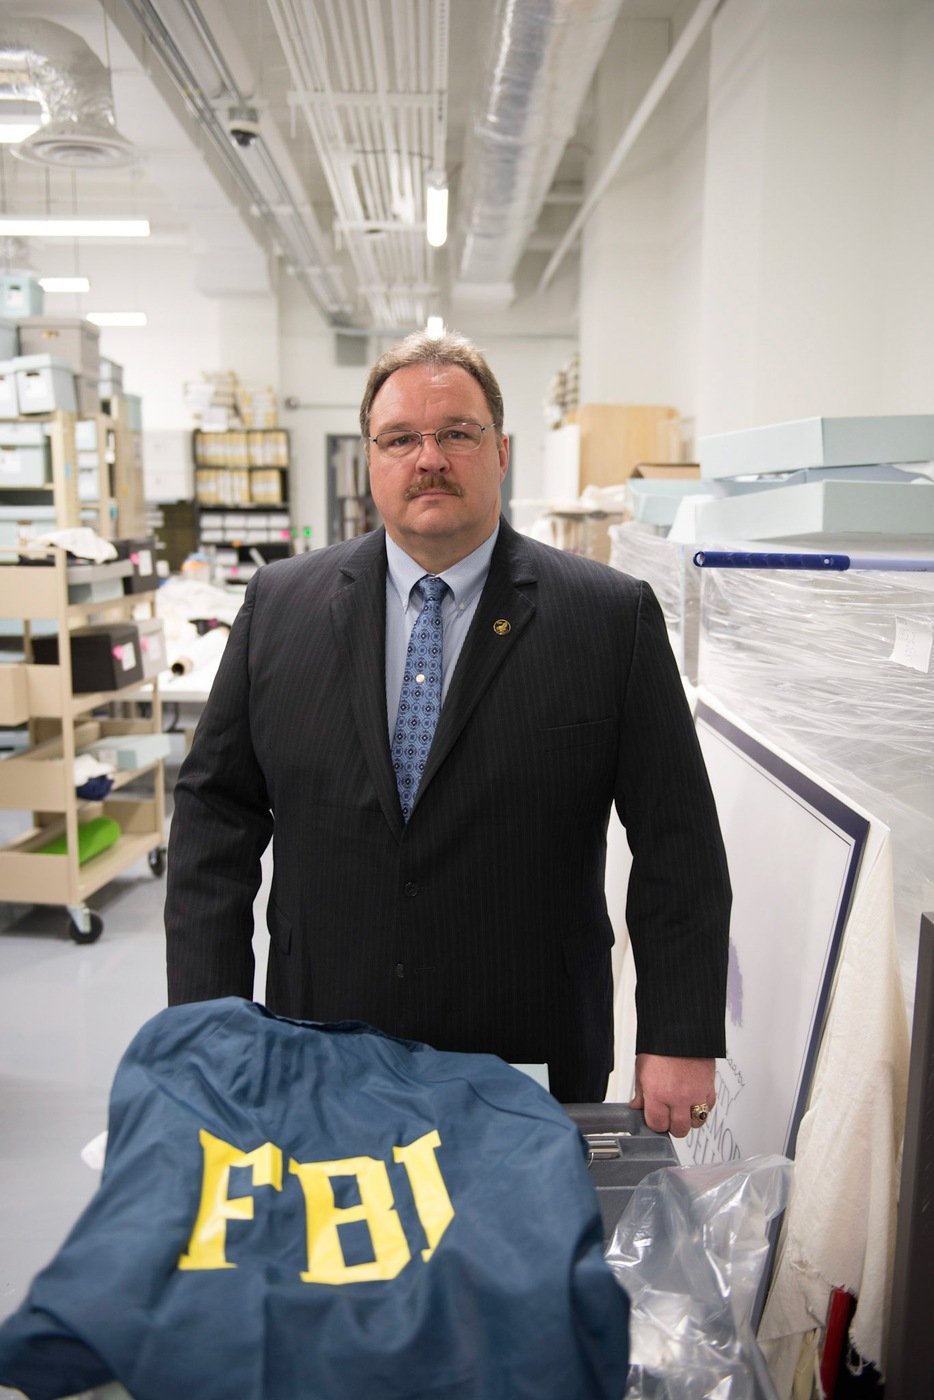 FBI Oklahoma City Special Agent Barry Black retired in 2019 and donated some of his own equipment to the Oklahoma City National Memorial and Museum, including his hard hat and field jacket.